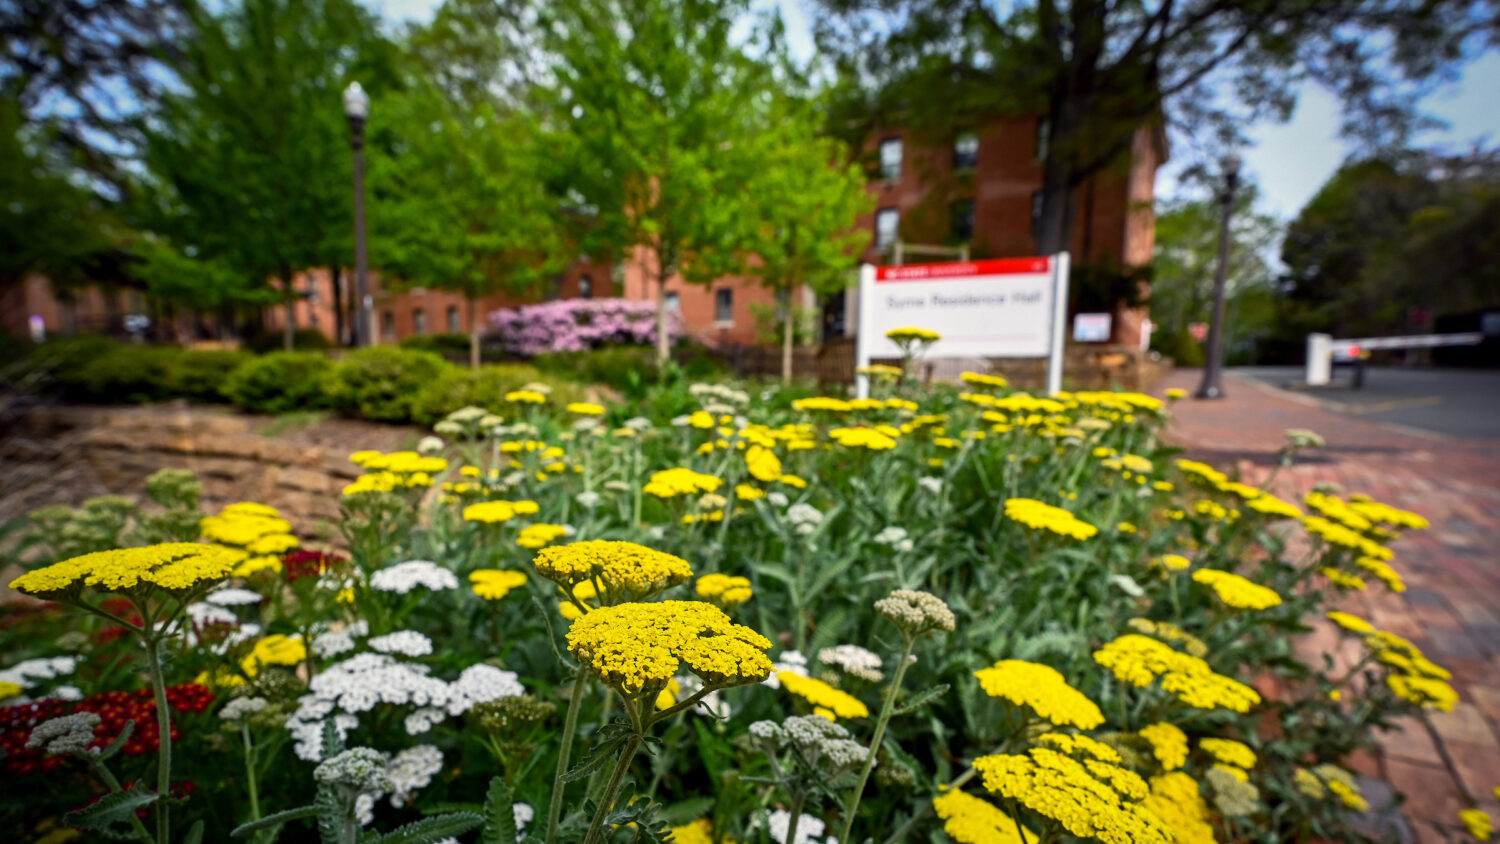 Spring blooms and greenery welcome pedestrians to Syme Residence Hall and the surrounding area. Photo by Becky Kirkland.